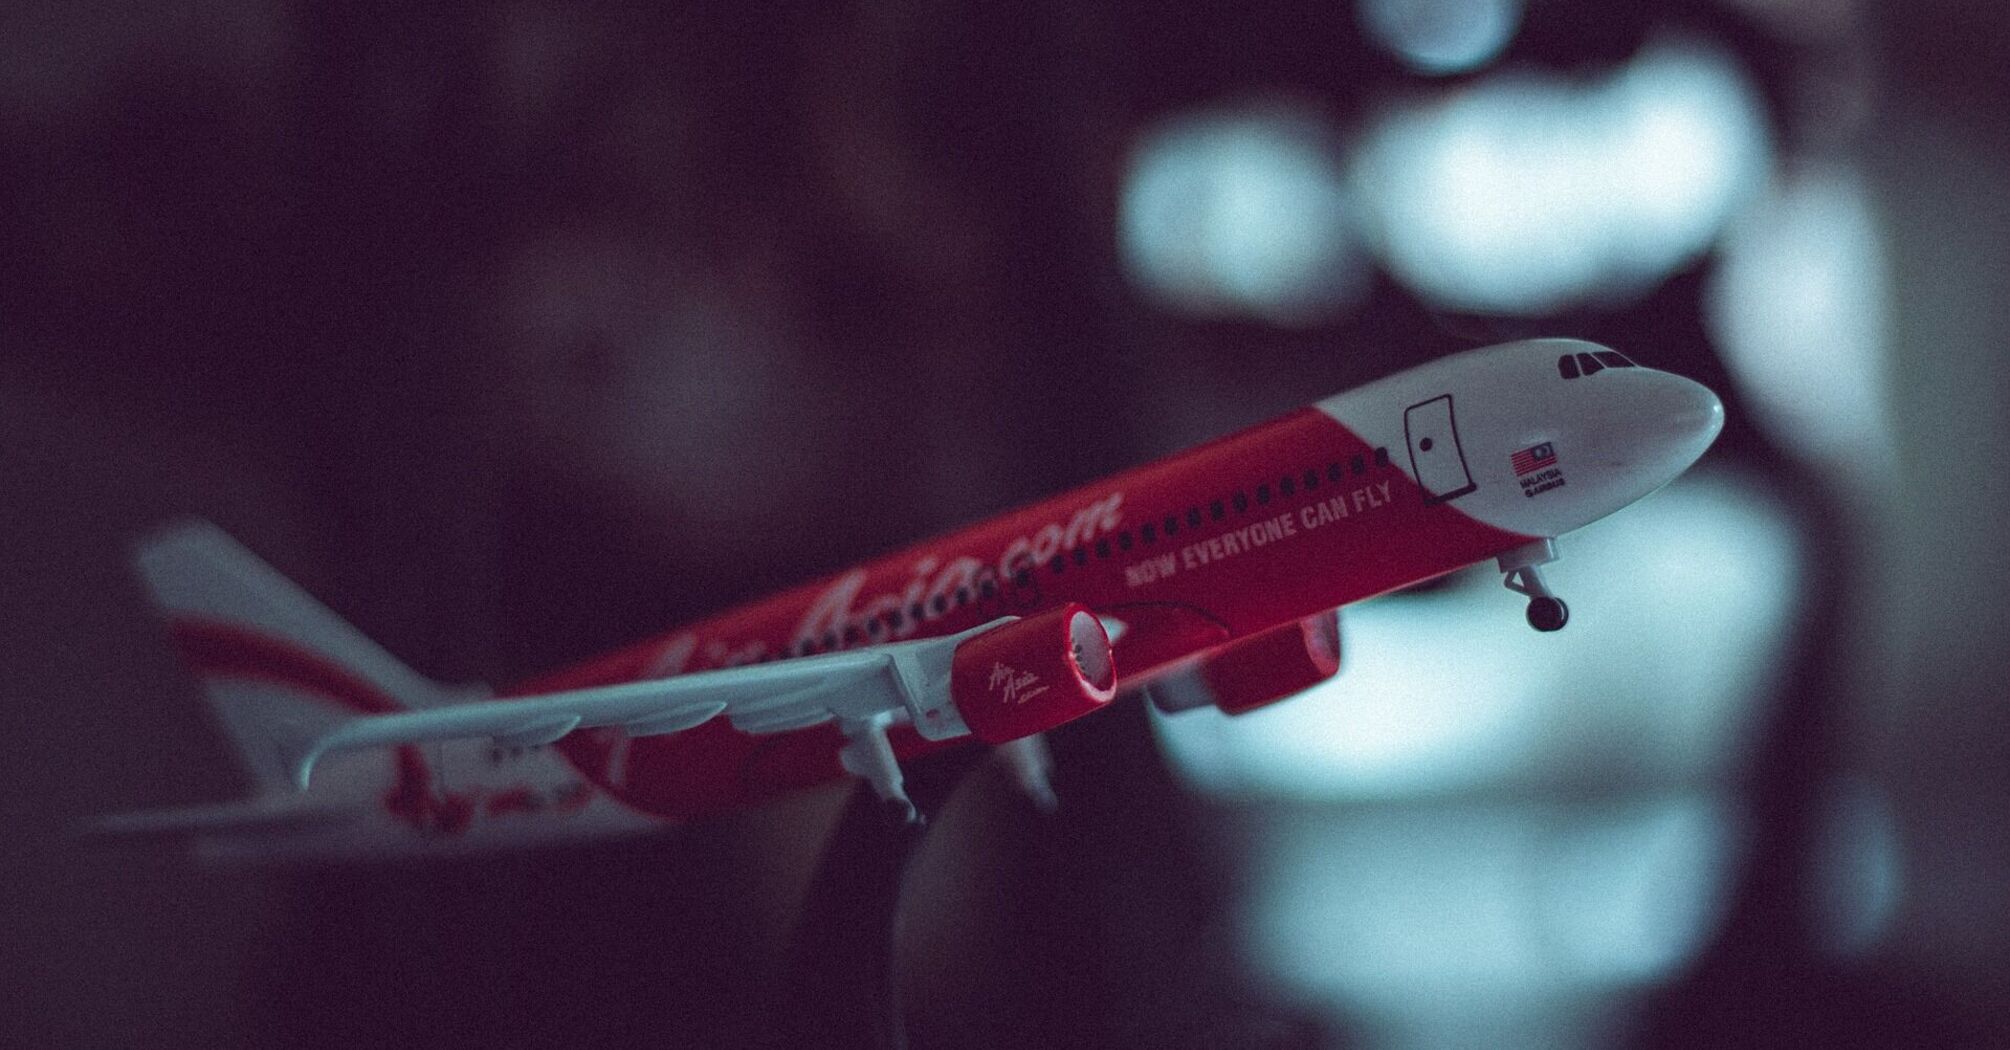 A model of a red AirAsia aircraft held in mid-air against a blurred background, showcasing the airline's livery and logo